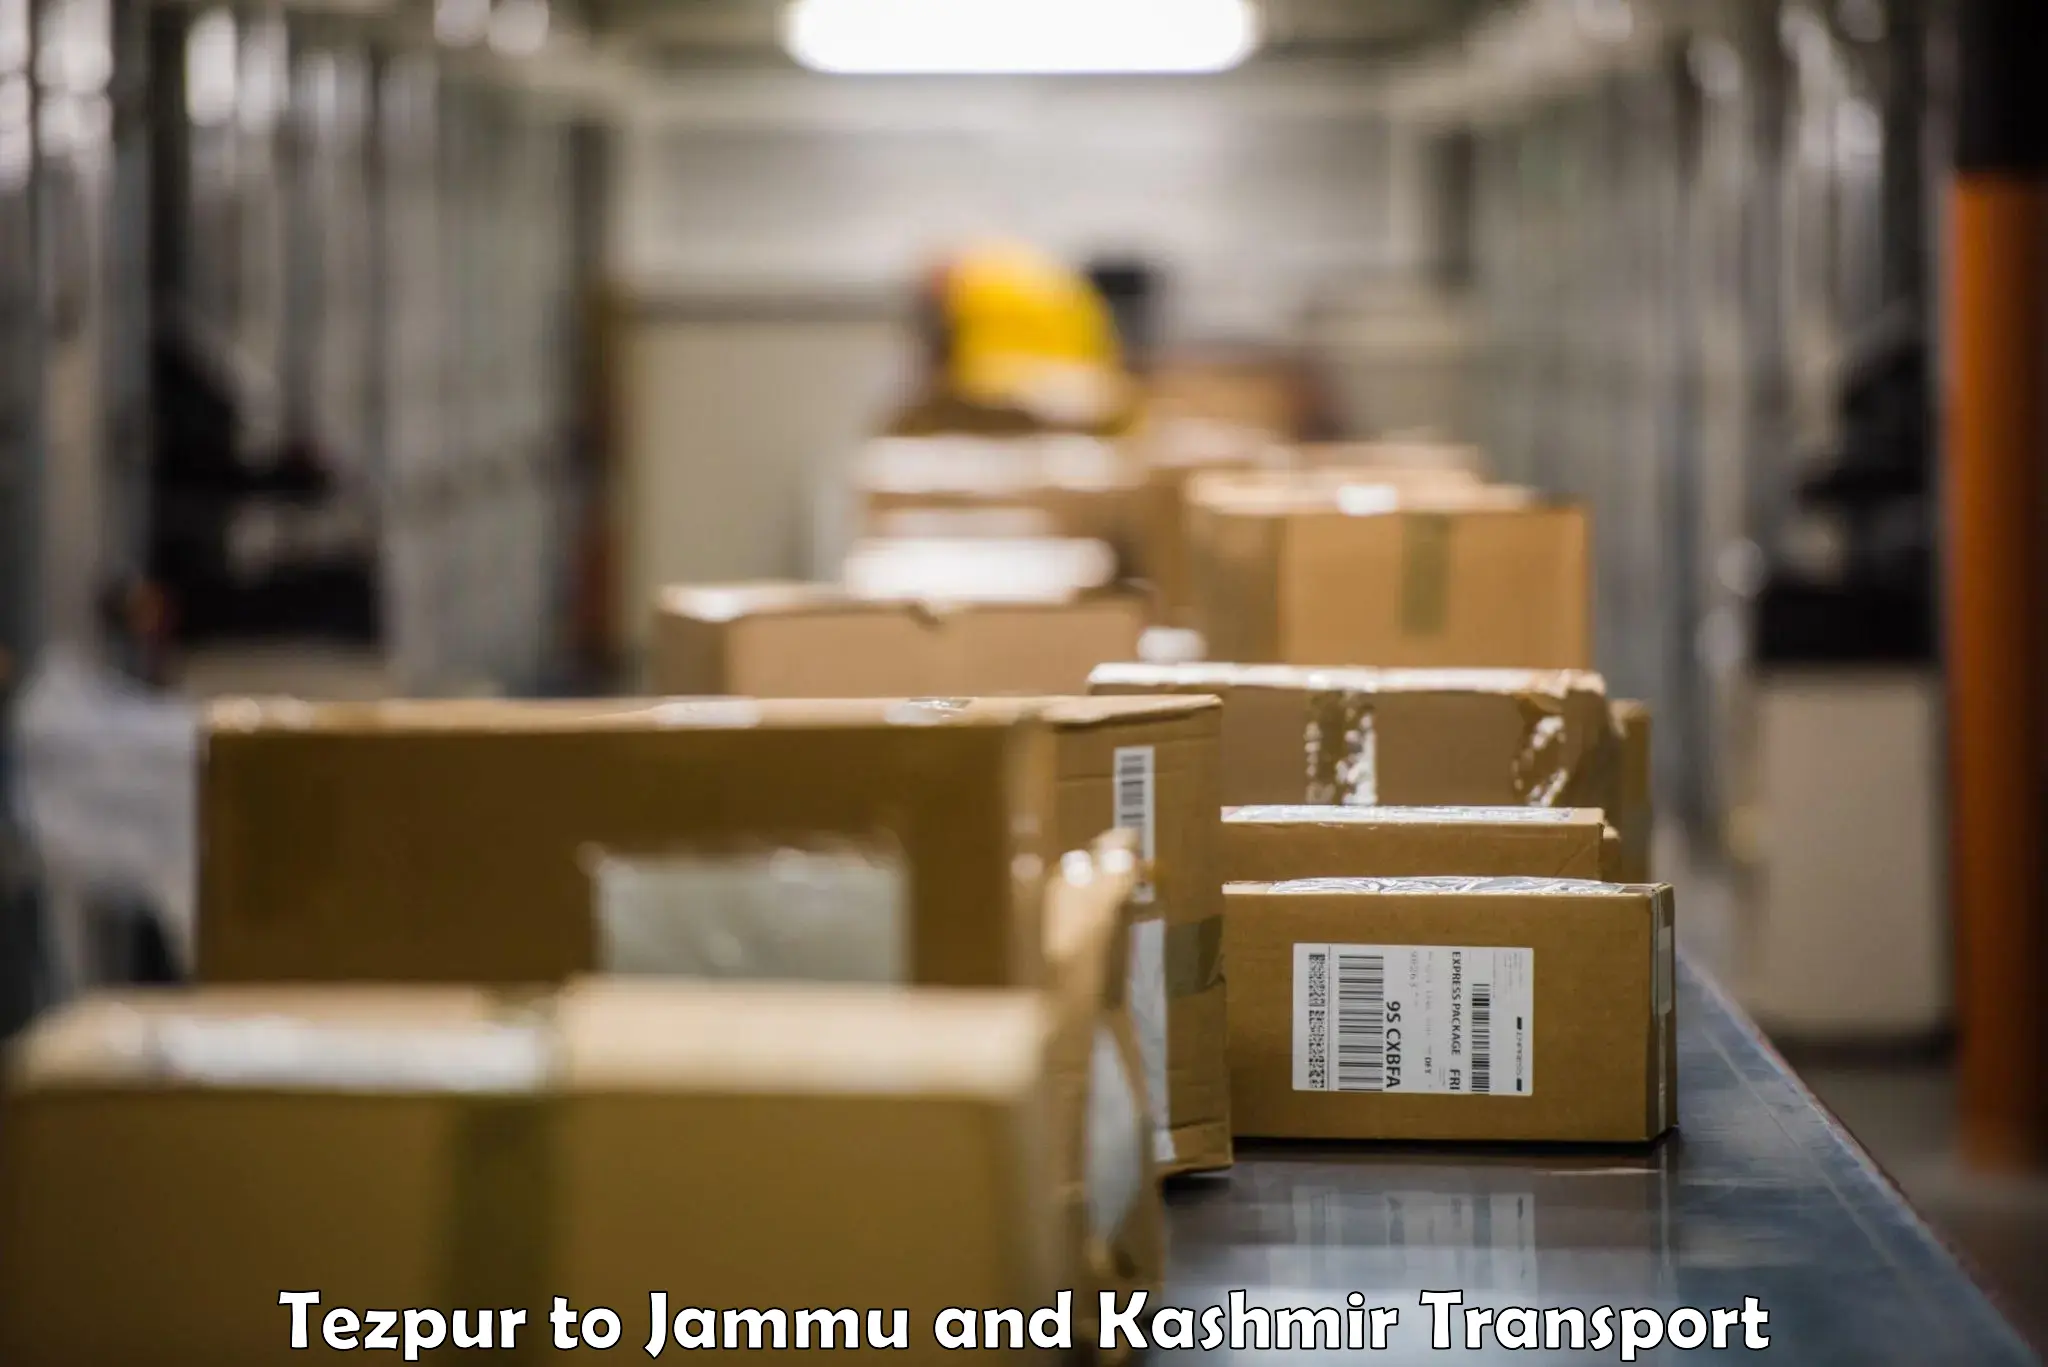 Daily transport service Tezpur to Jammu and Kashmir